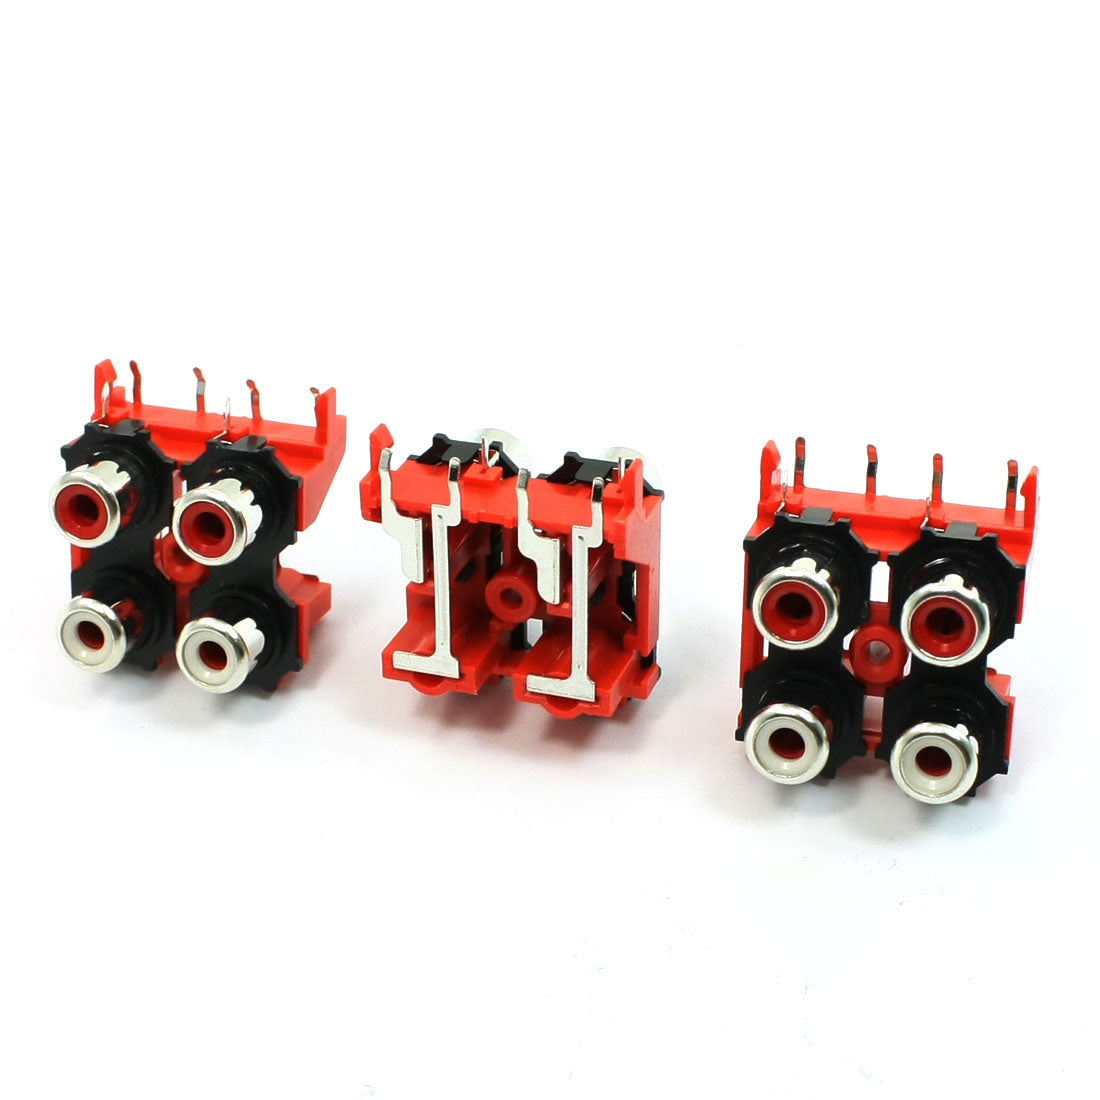 uxcell Uxcell 3 Pcs 4 RCA PCB Mount Female Outlet Jack Connector RCA Socket Black Red